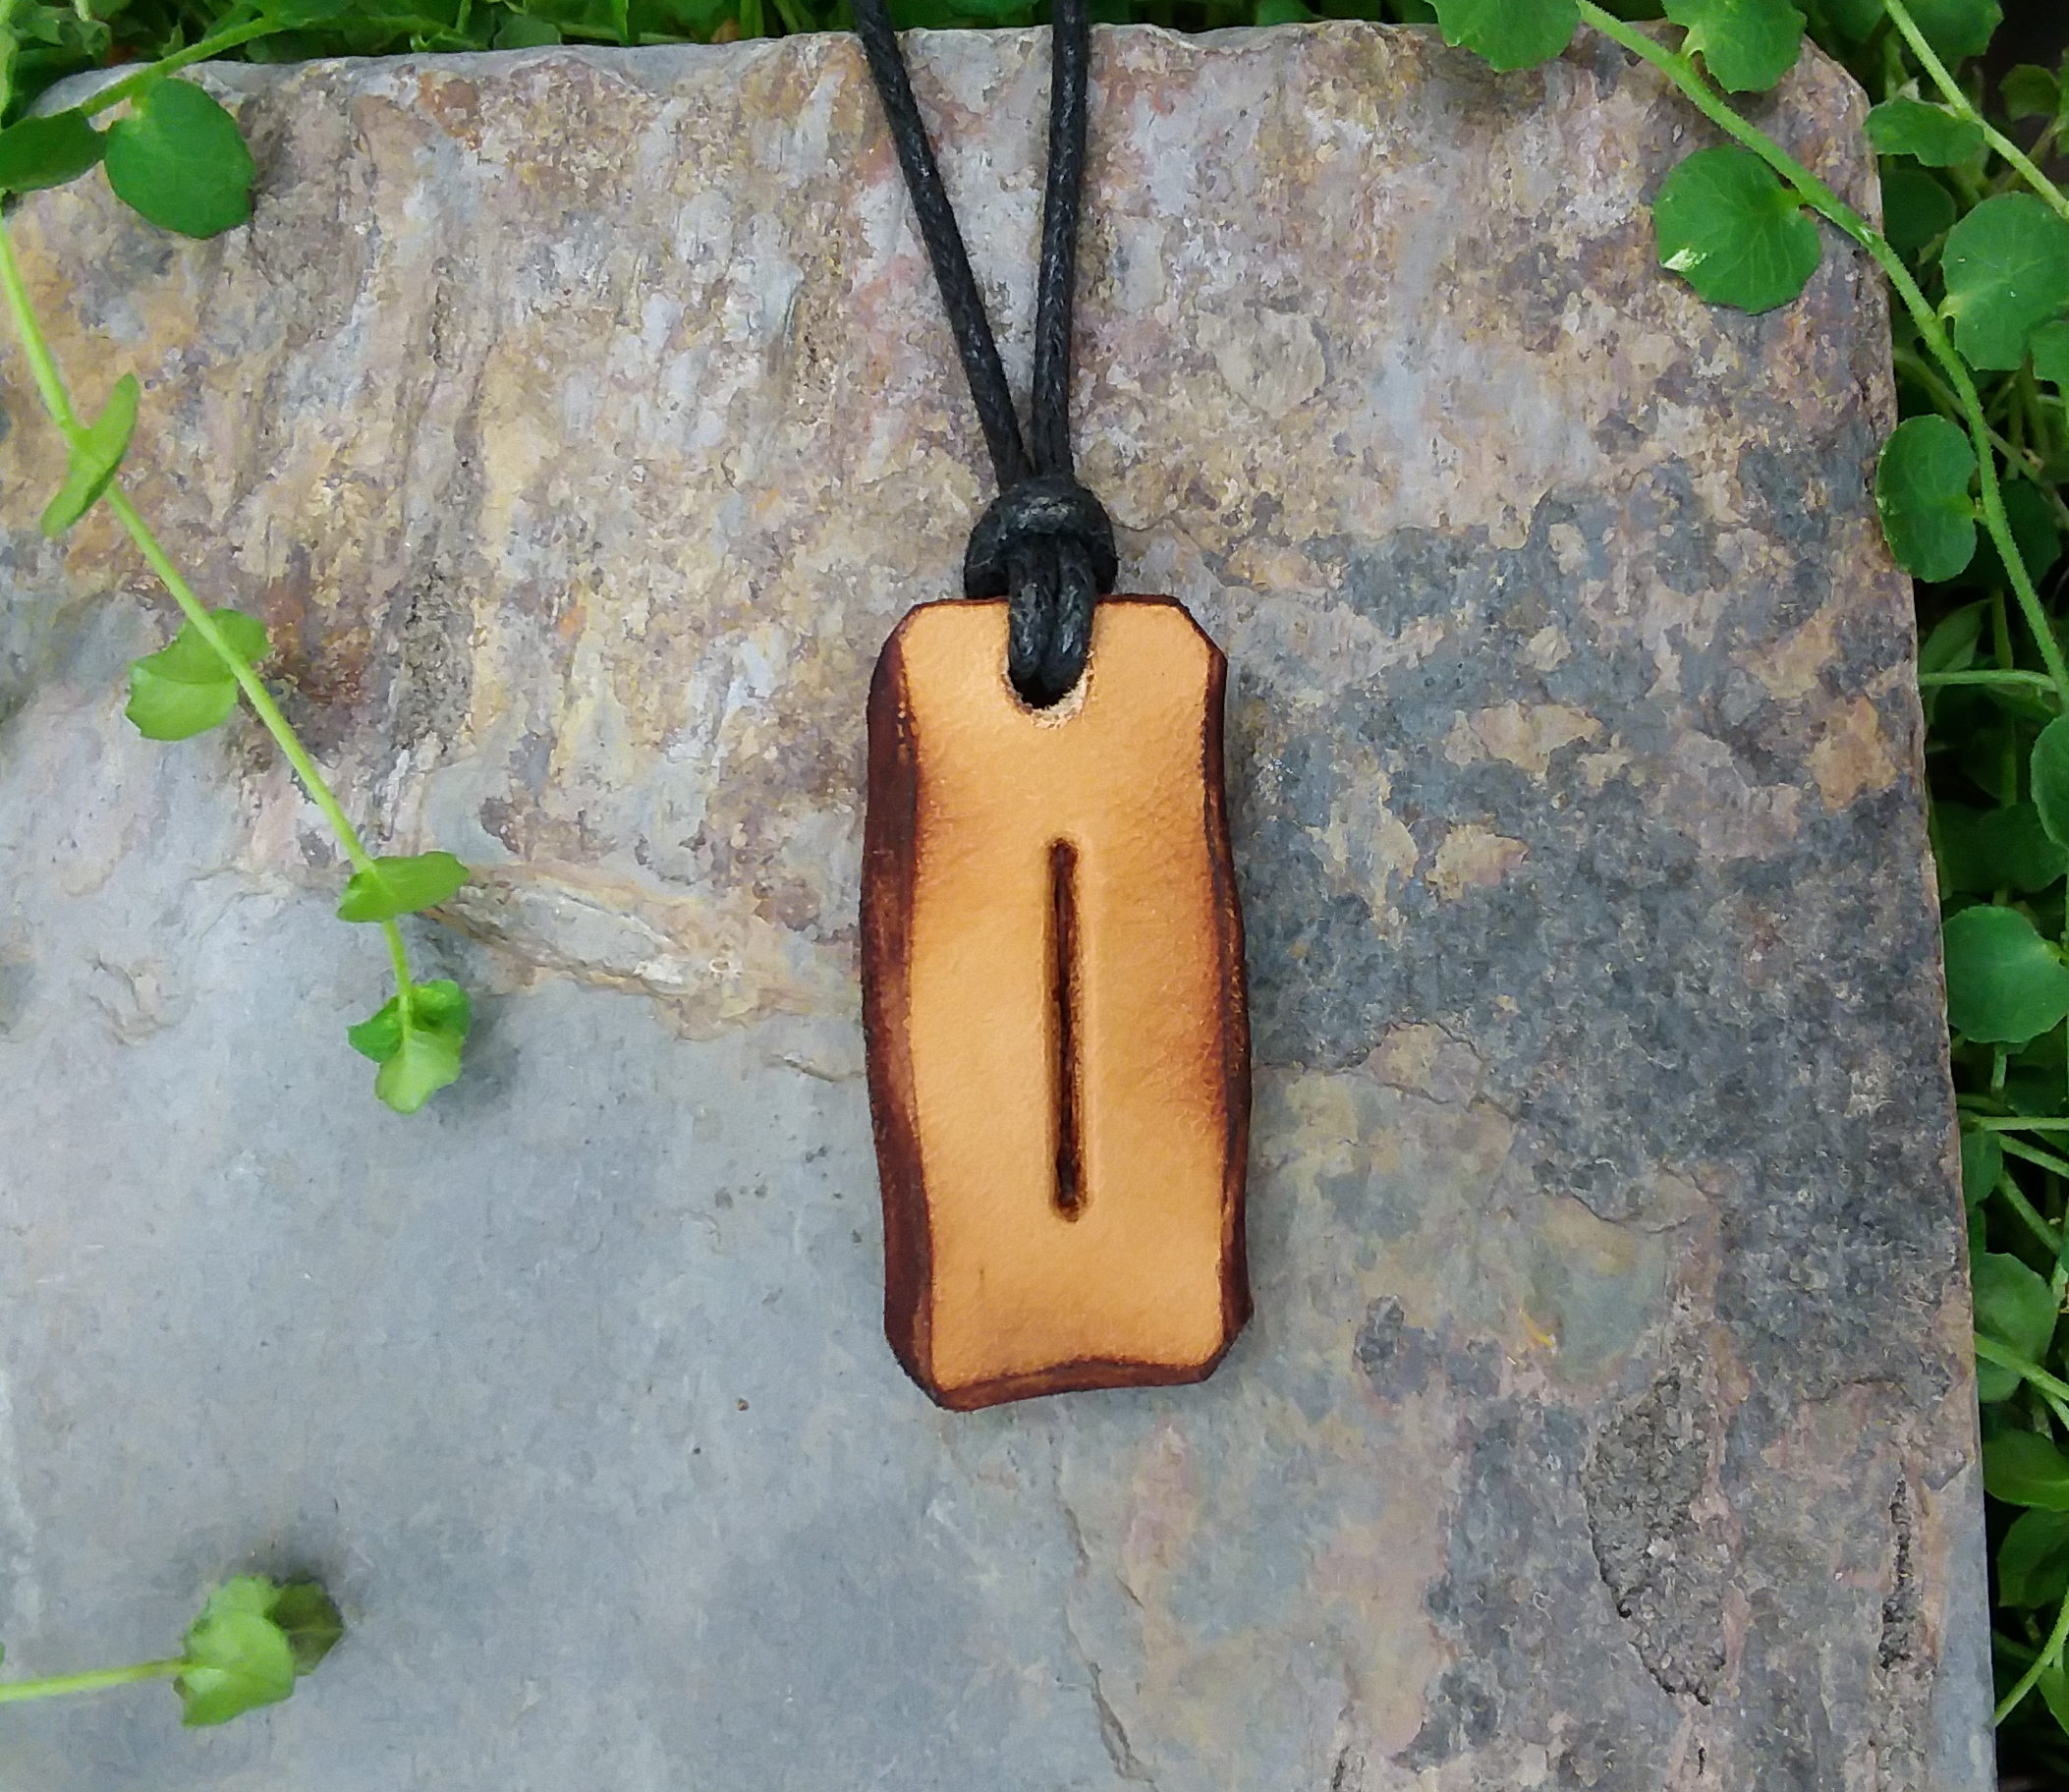 Leather Rune Pendant - Isa "Ice" Patience & Reflection